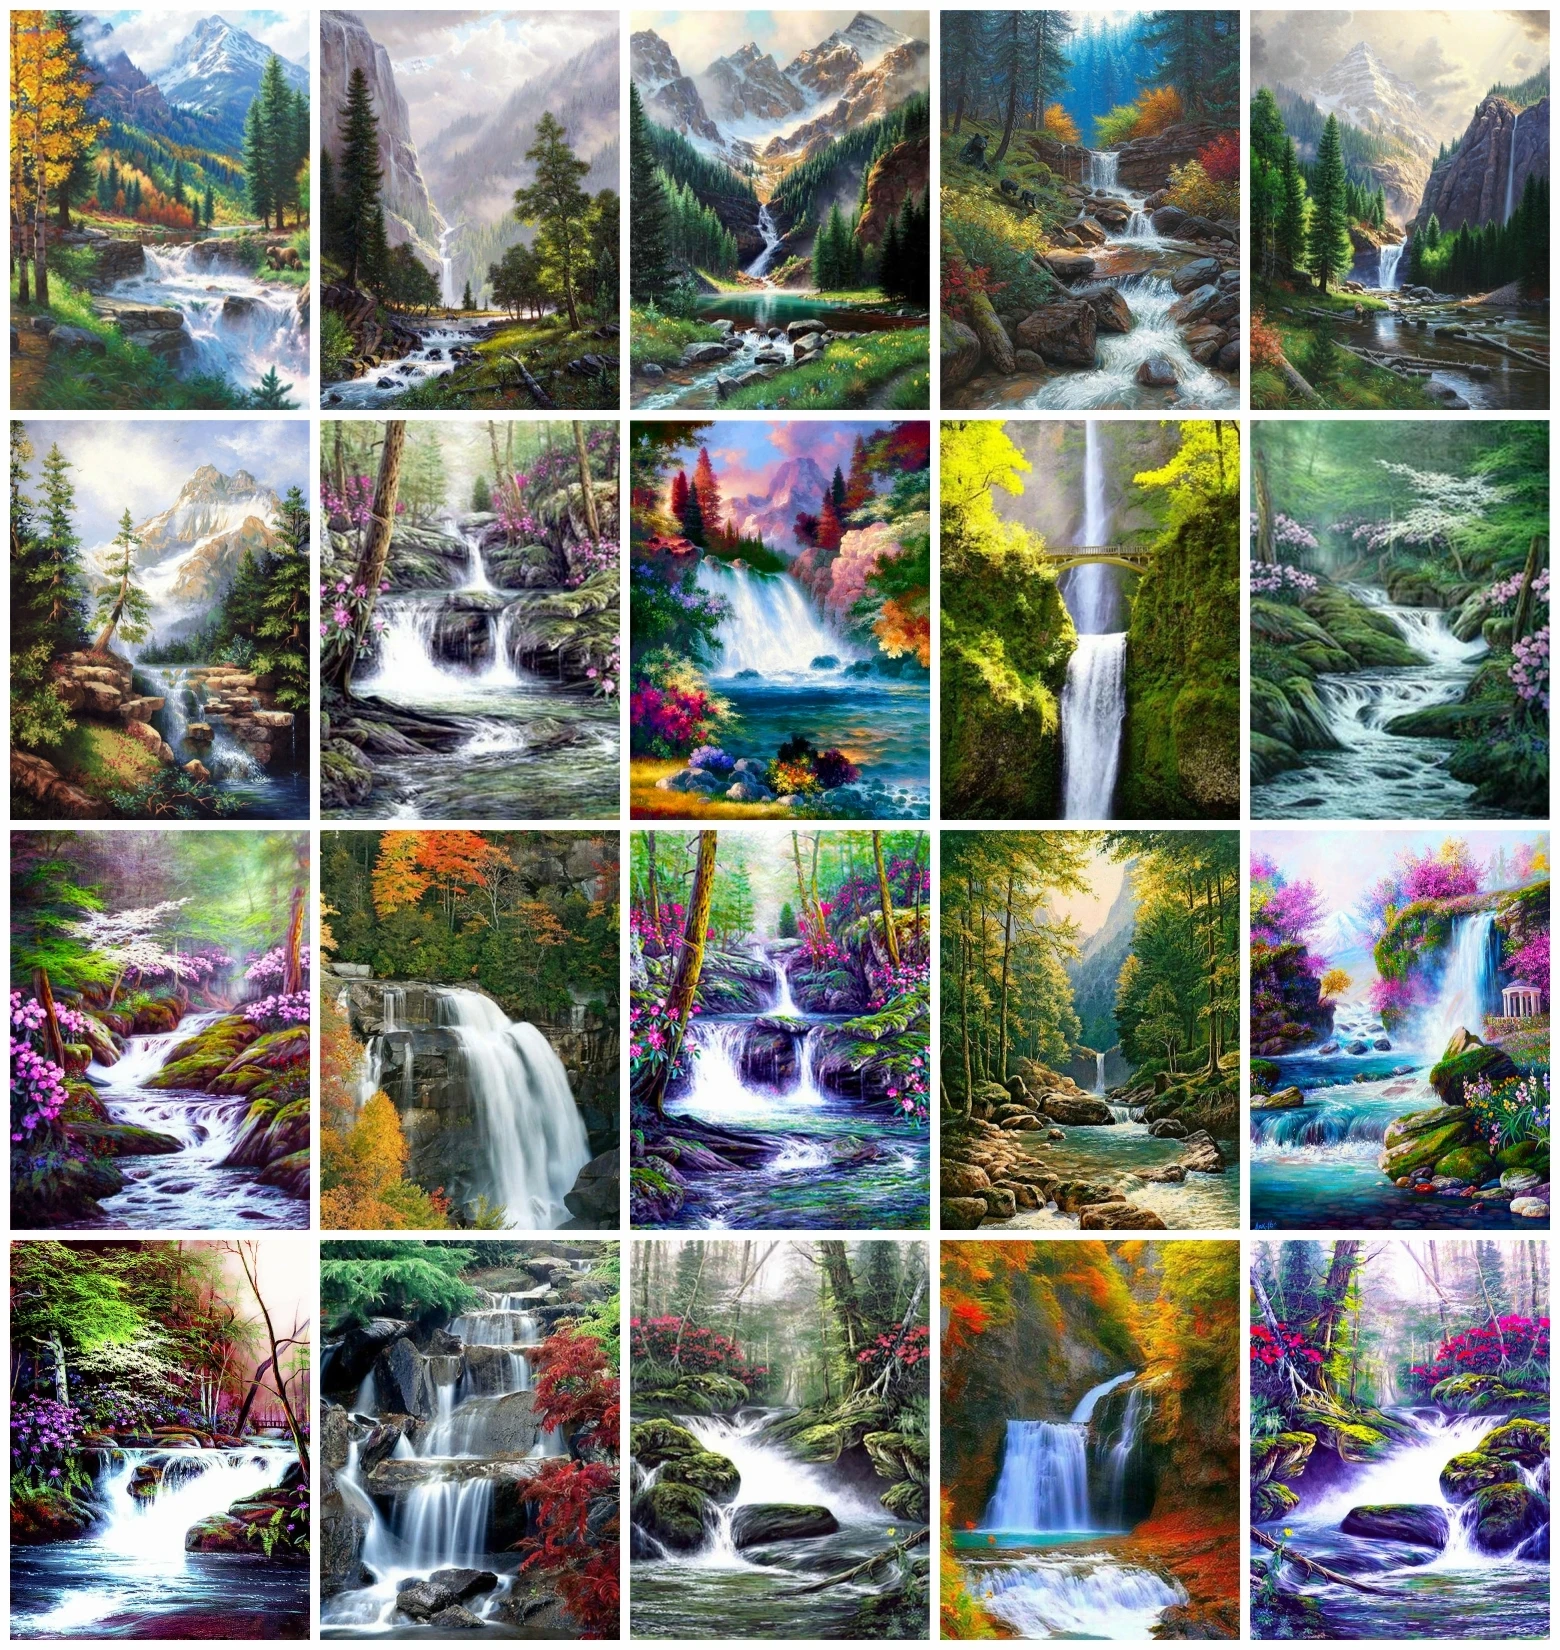 

AZQSD DIY Coloring Picture By Number Waterfall Mountain On Canvas Handpainted Painting By Numbers Landscape Frameless Wall Decor